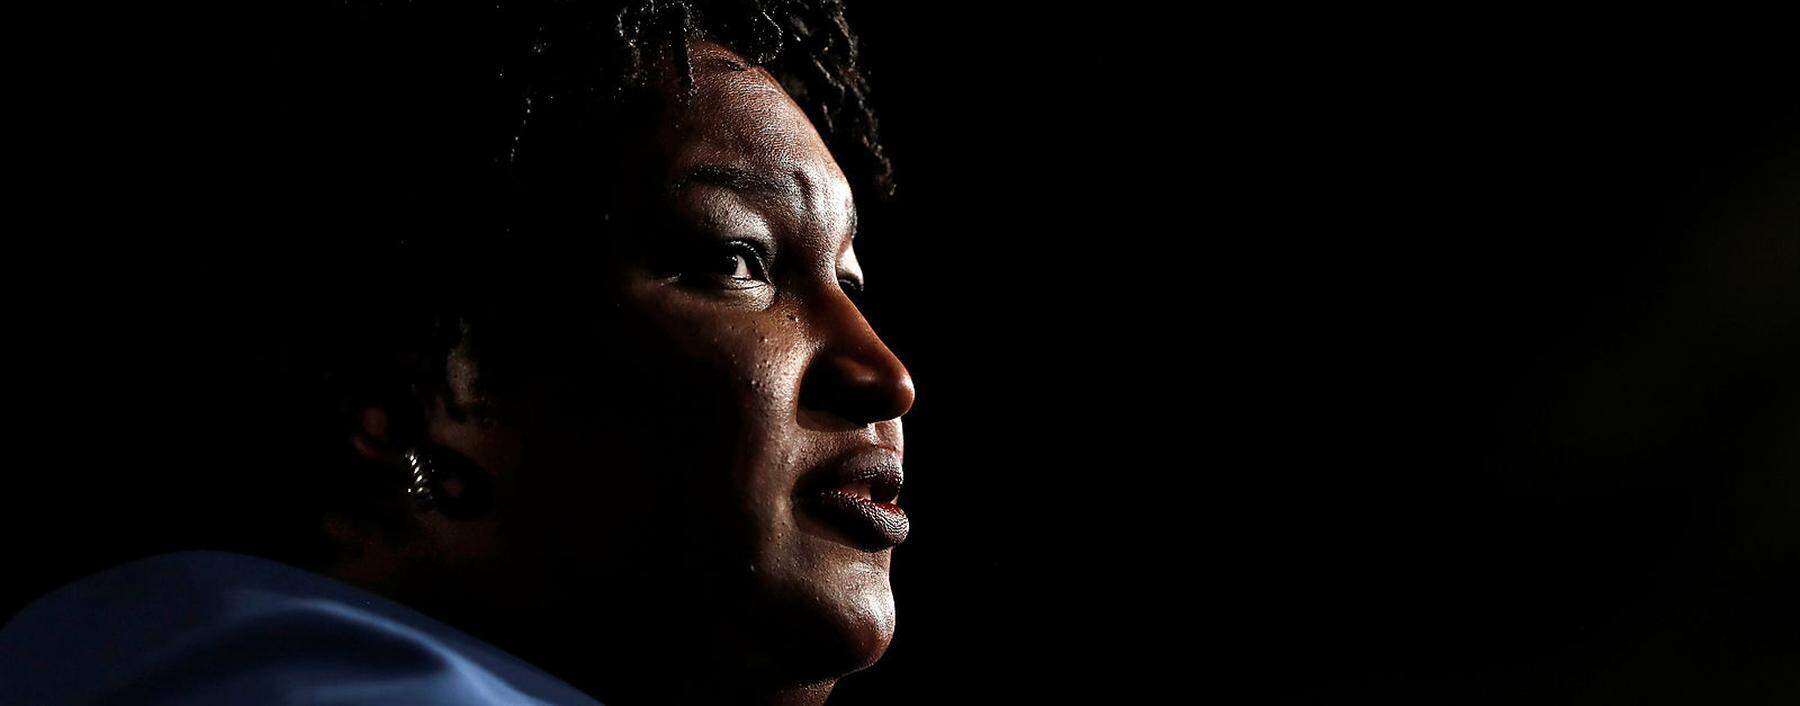 Georgia Democratic gubernatorial nominee Stacey Abrams speaks to supporters during a midterm election night party in Atlanta, Georgia, U.S.